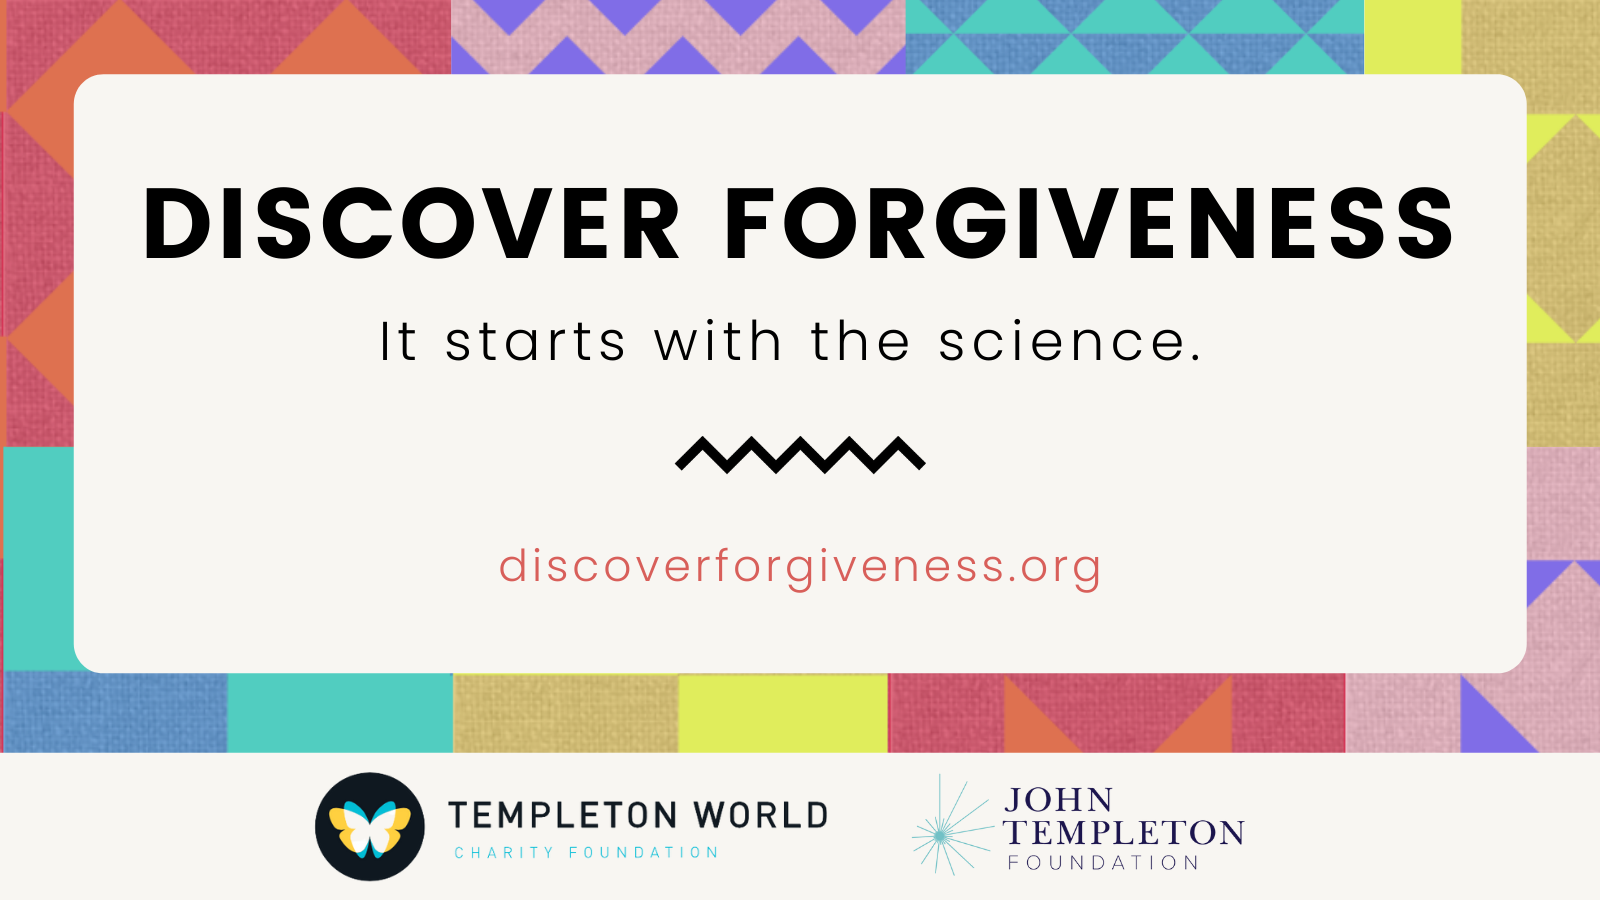 Introducing DiscoverForgiveness.org